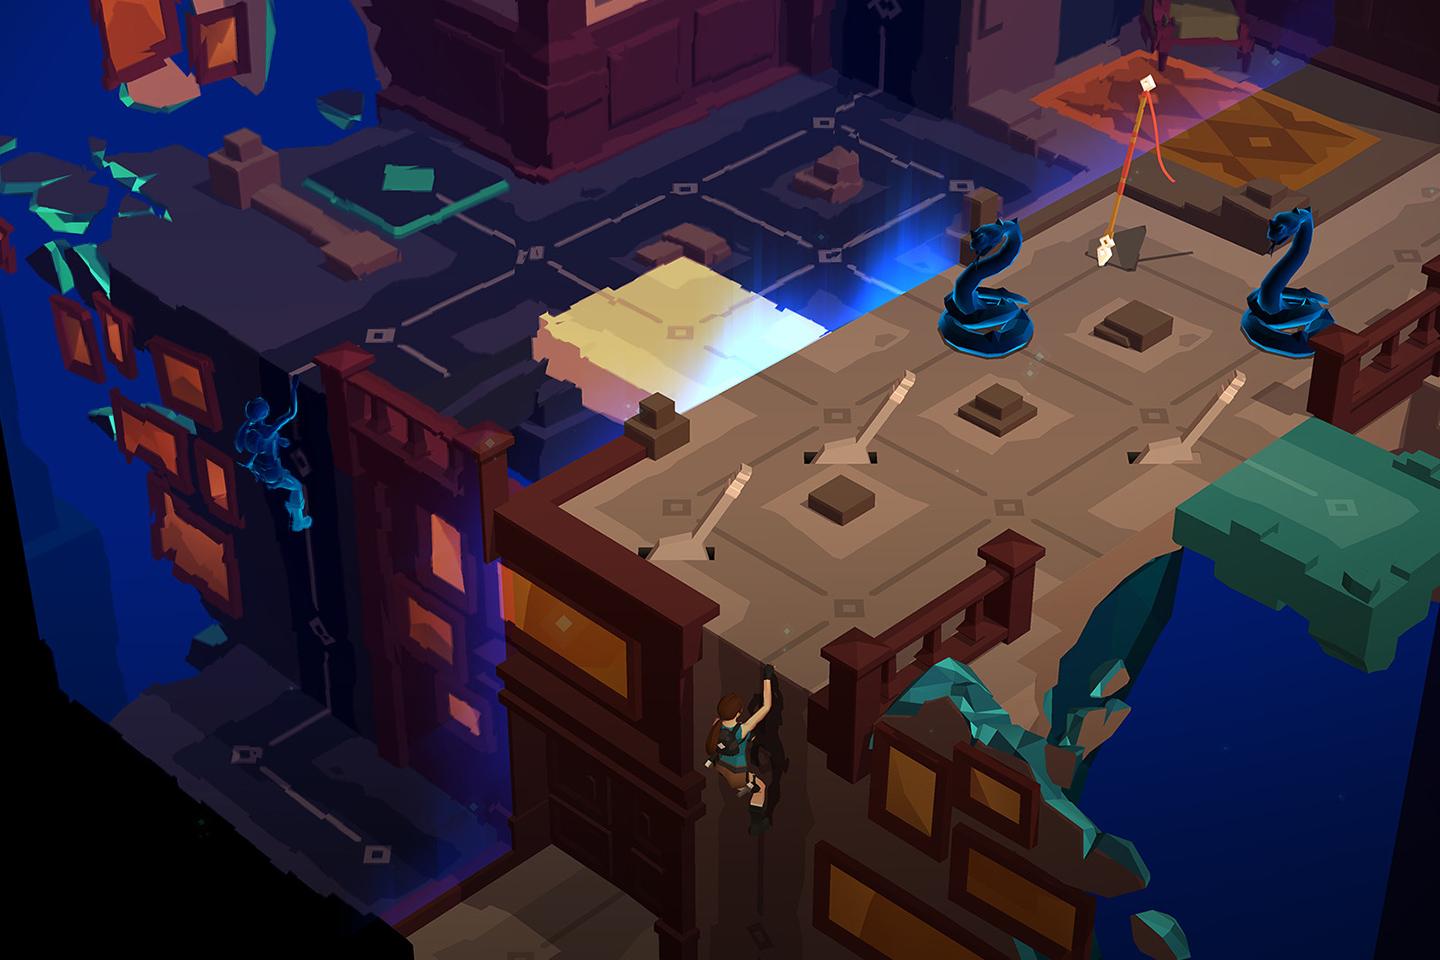 A vivid game screenshot showcasing a character navigating a complex, floating puzzle with serpentine statues and glowing floor patterns.